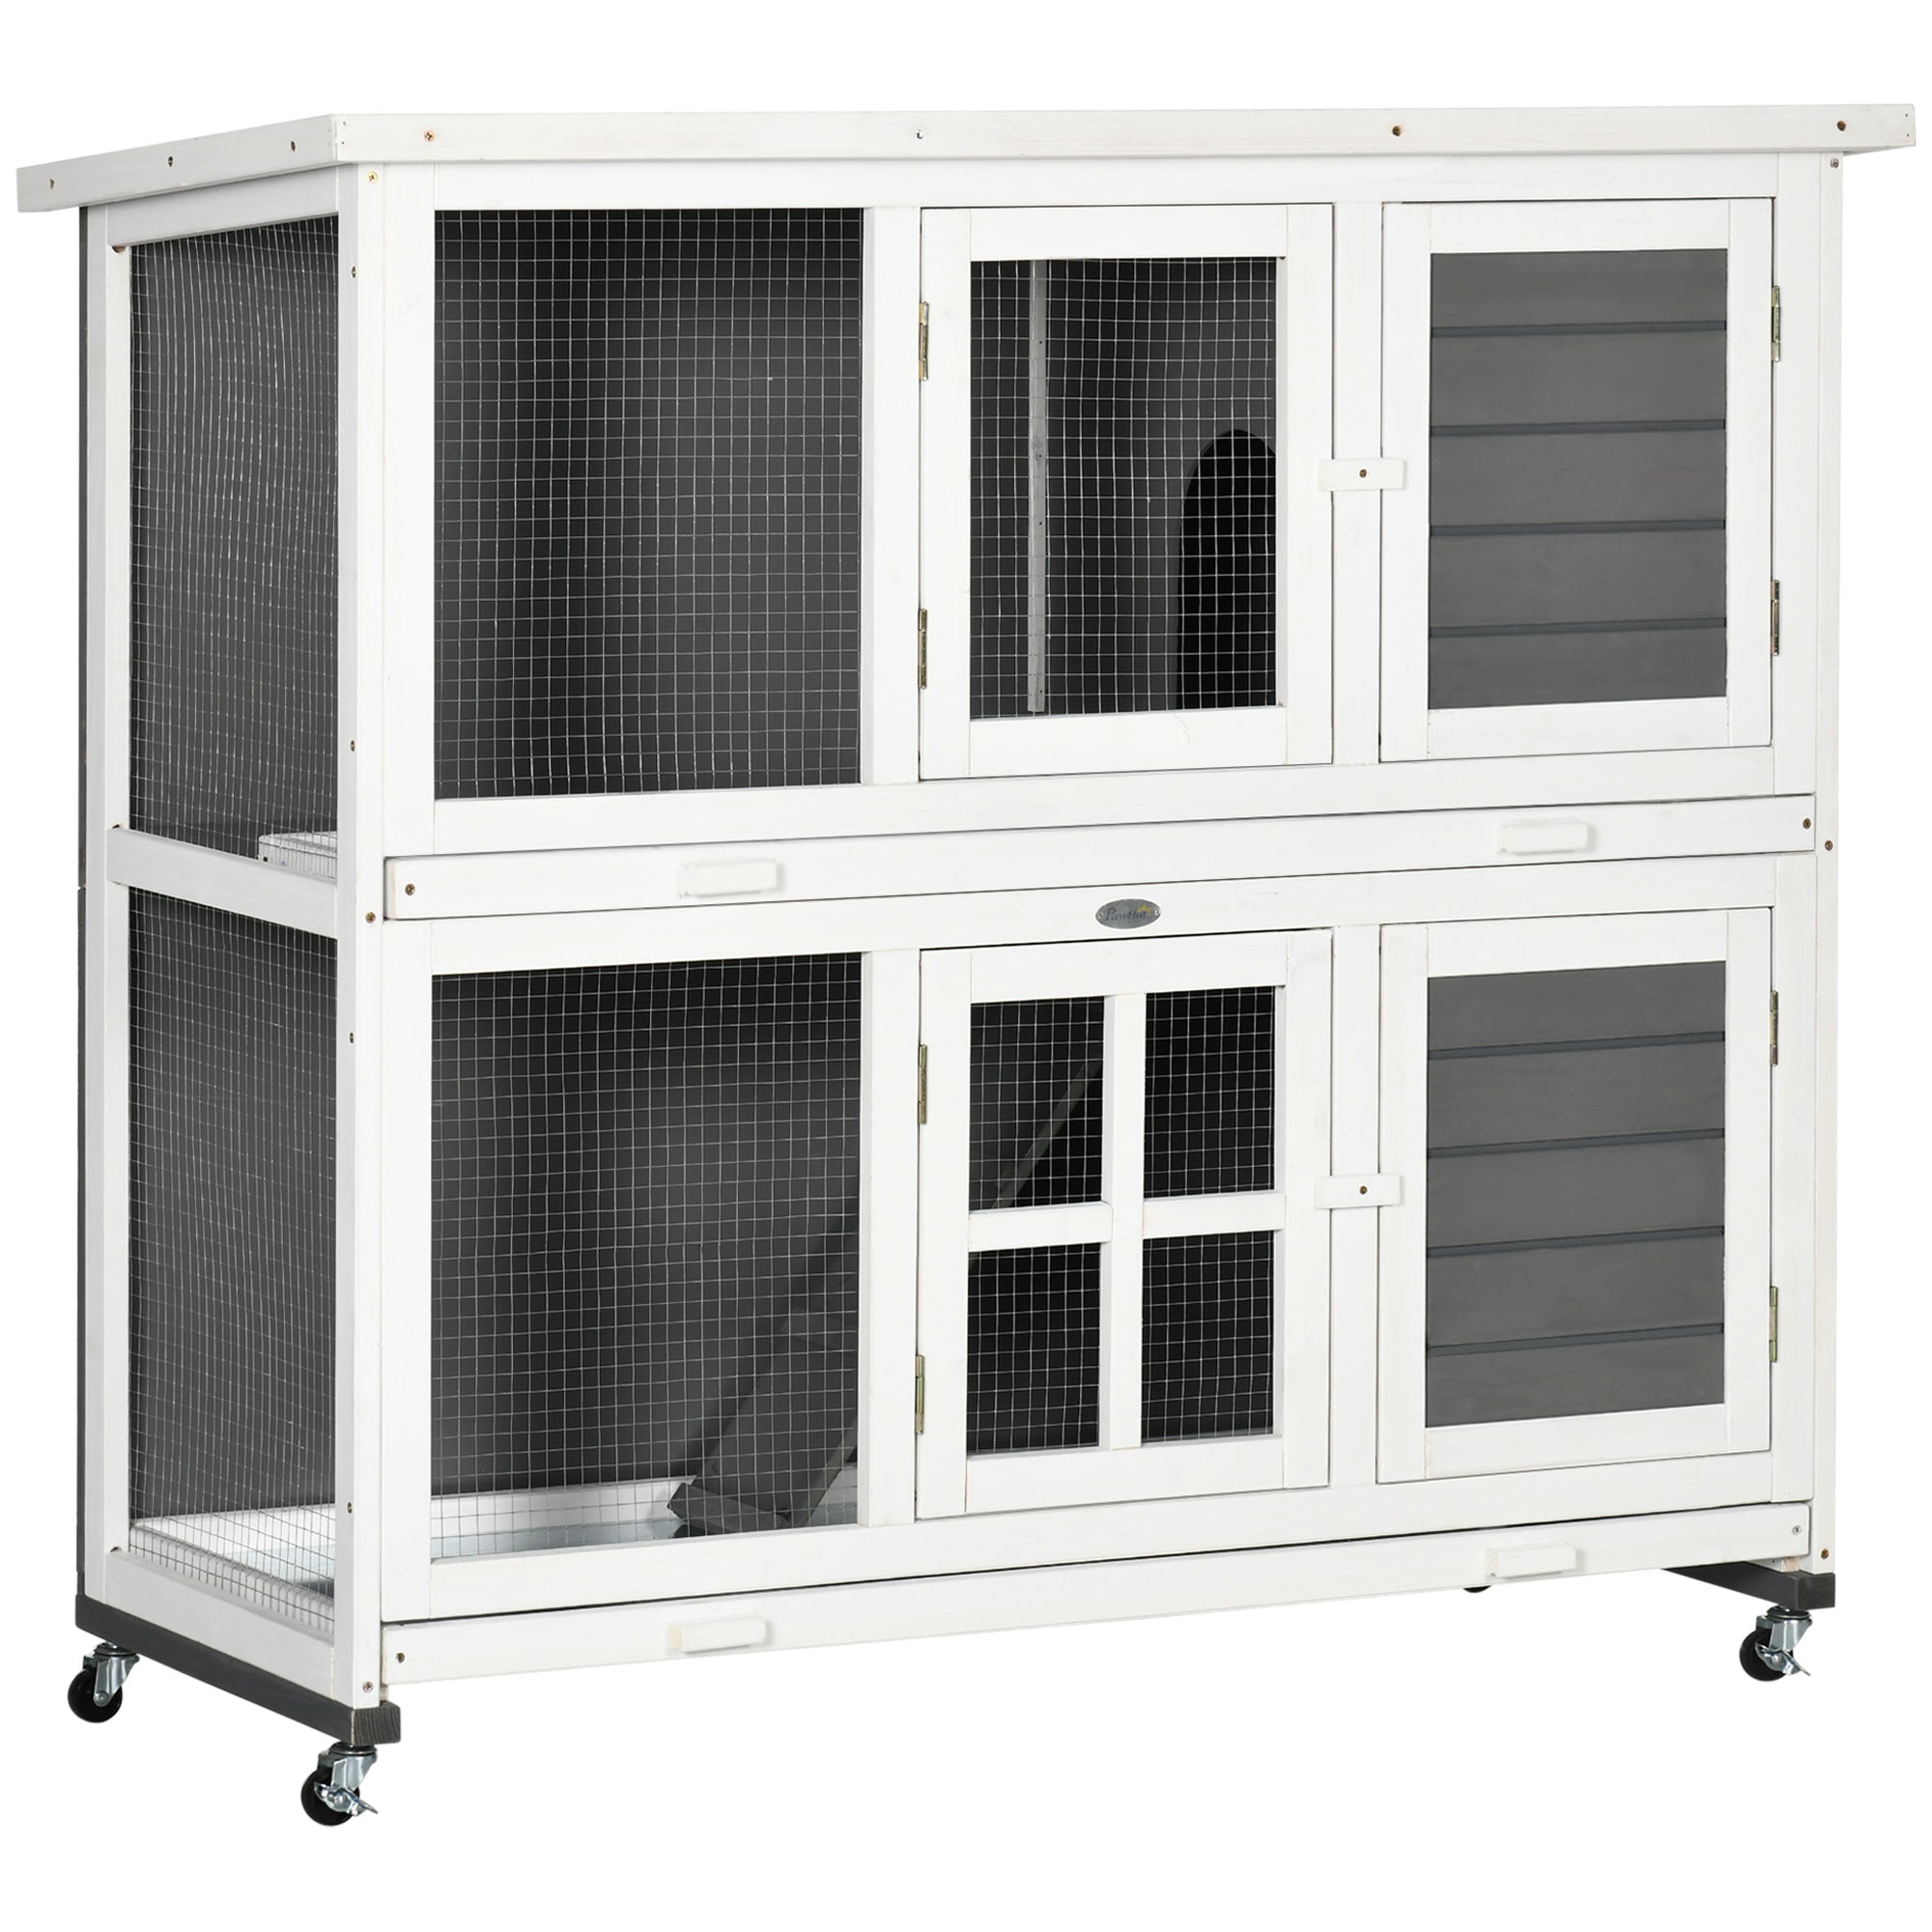 Wooden Rabbit Hutch with Wheels, Guinea Pig Cage, Small Animal House for Outdoor & Indoor with Slide-out Trays, 119 x 50.5 x 109cm, Grey, PawHut,